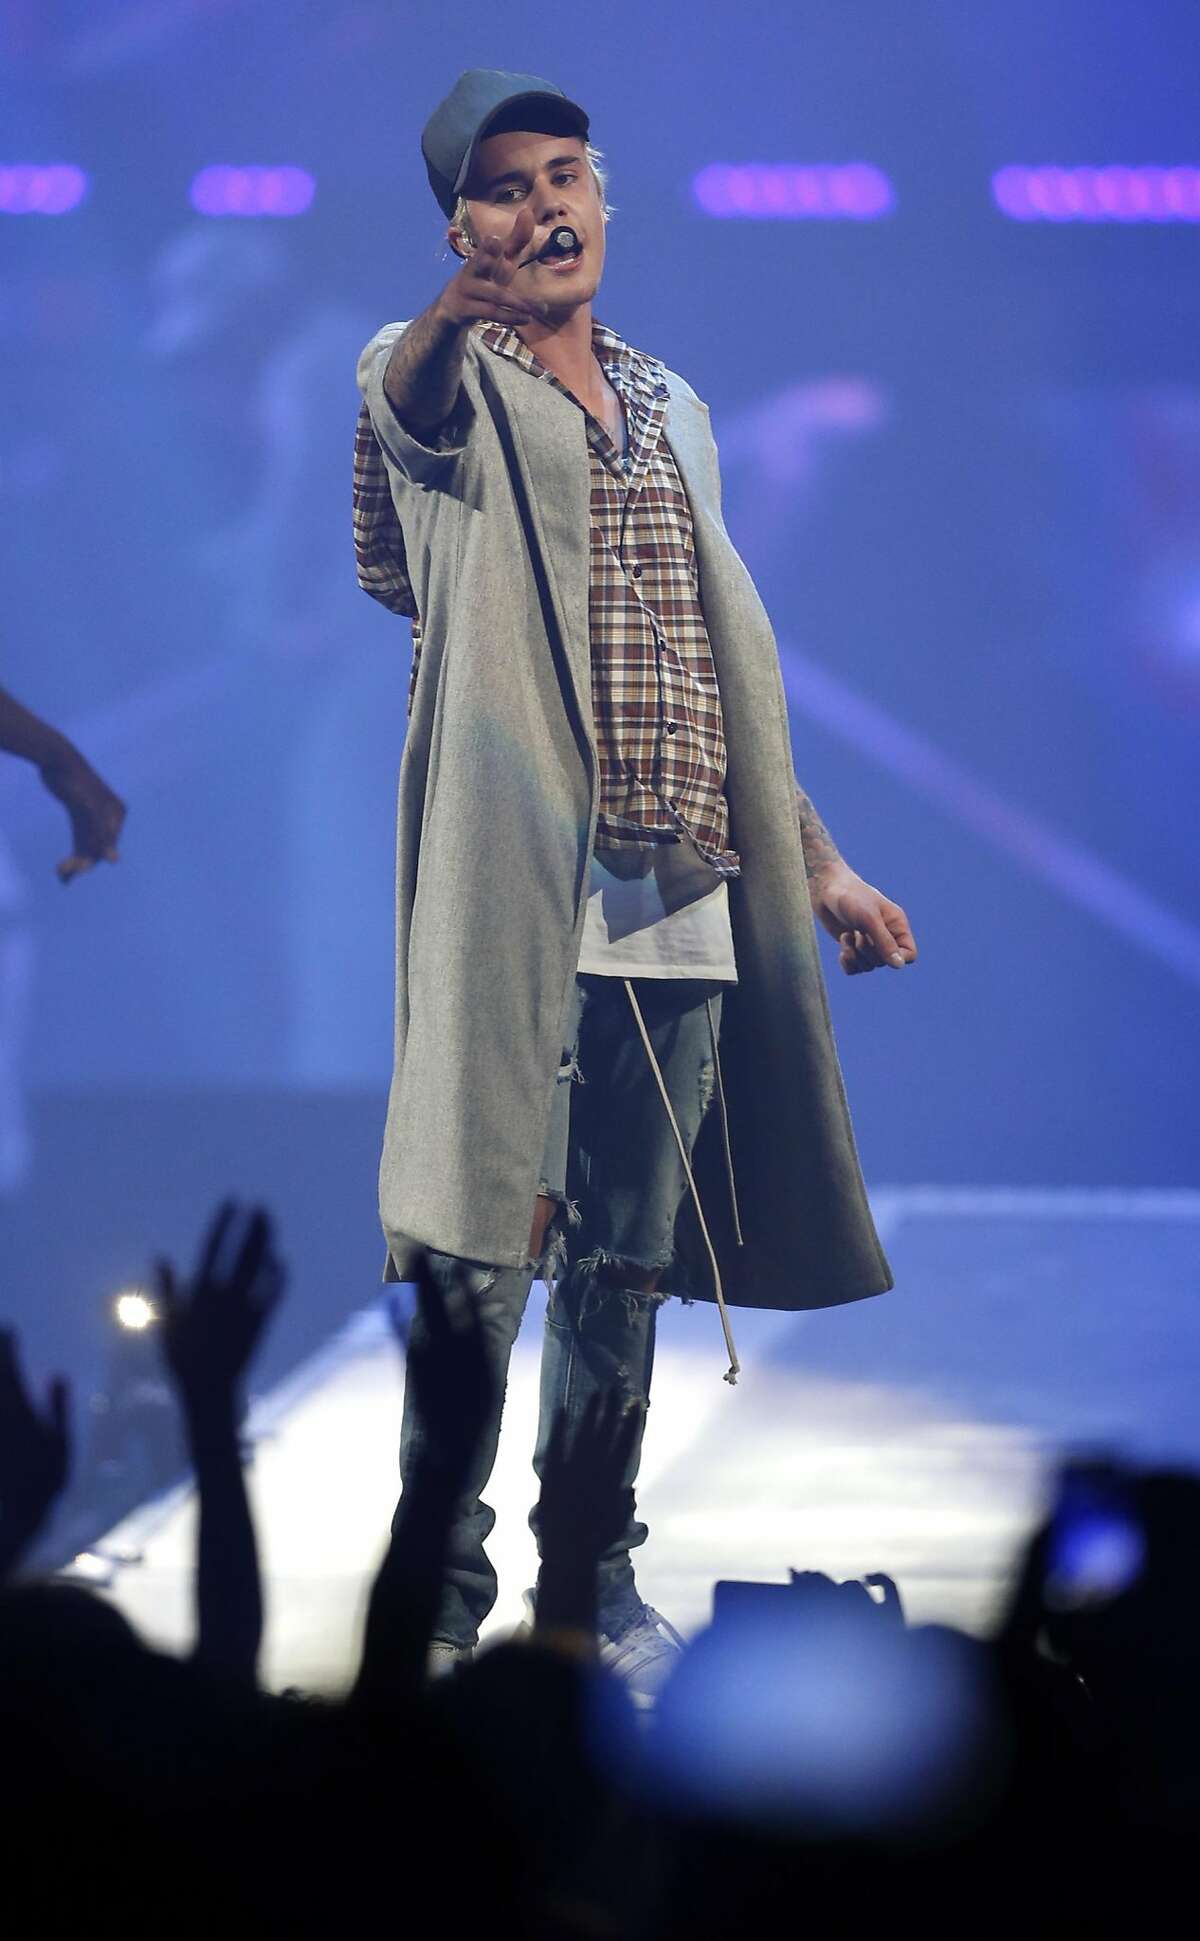 Justin Bieber performs at the SAP Center in San Jose, Calif., on Thursday, March 17, 2016.